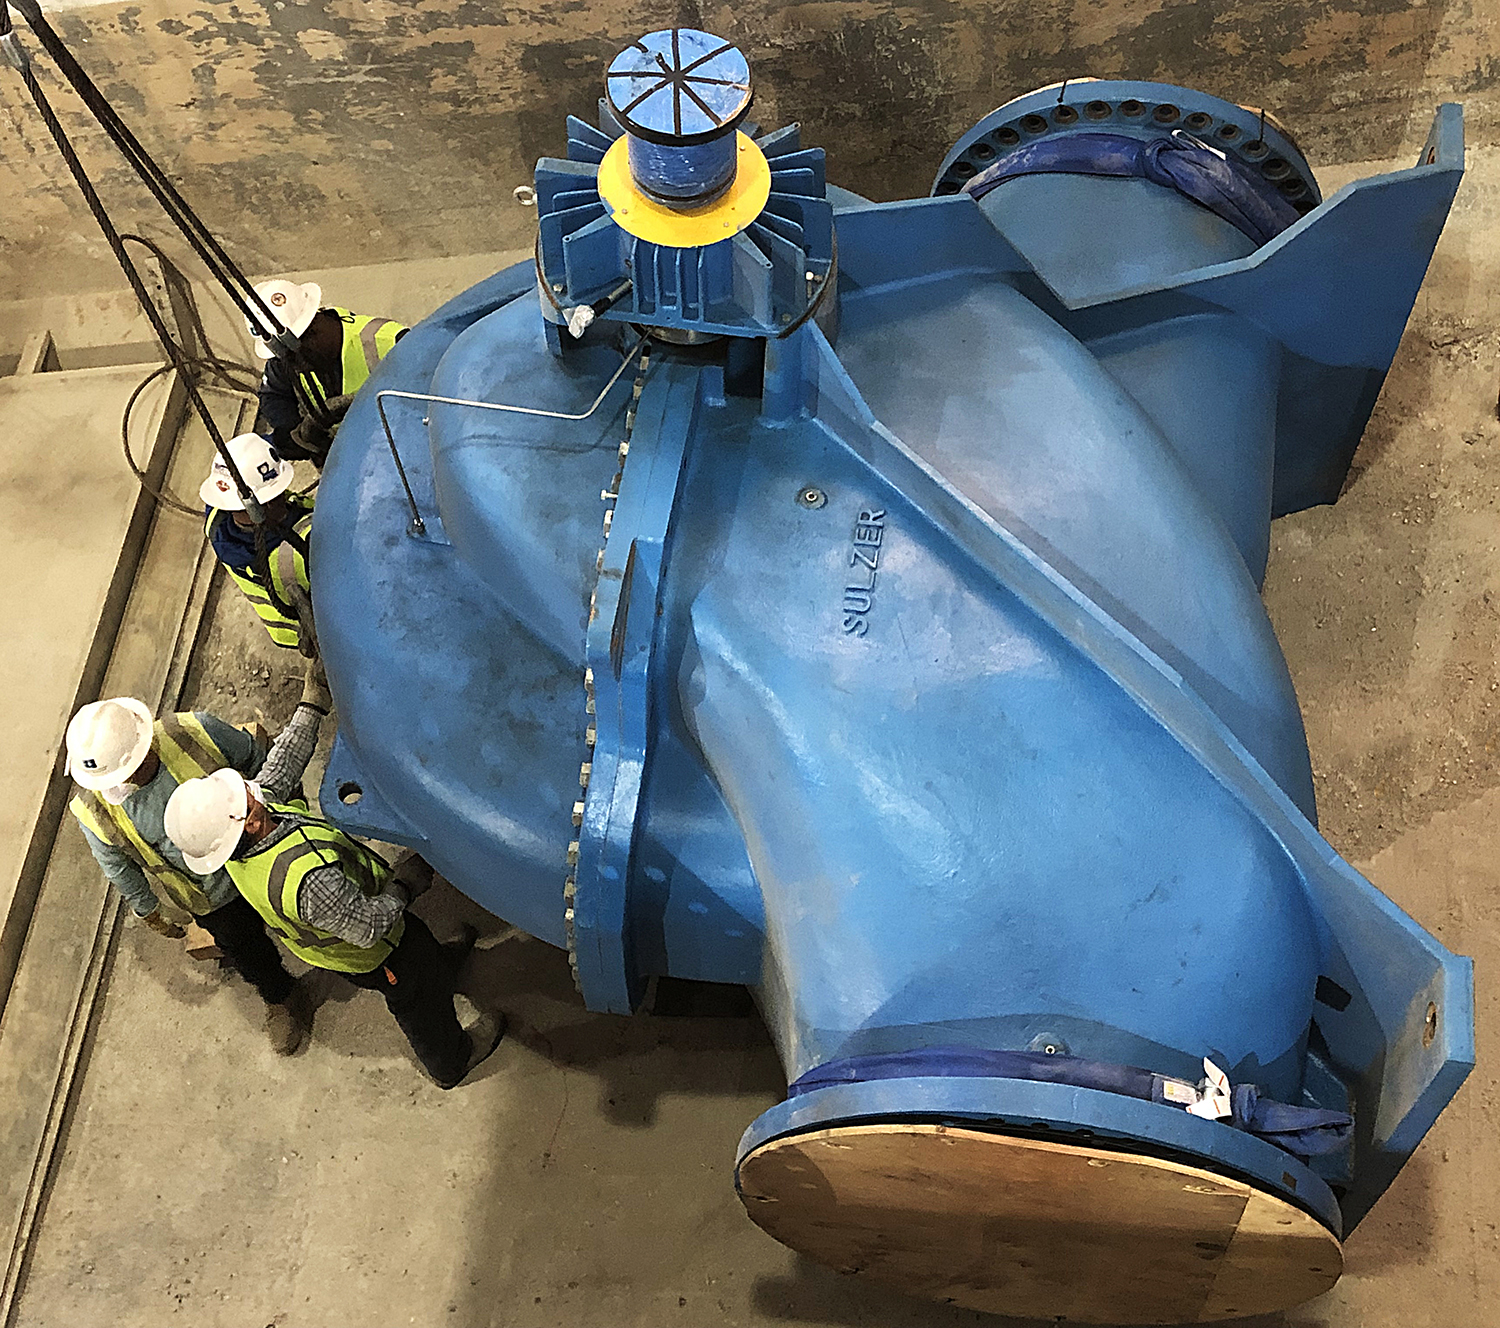 The new 18-tonne pumps presented a considerable installation challenge.